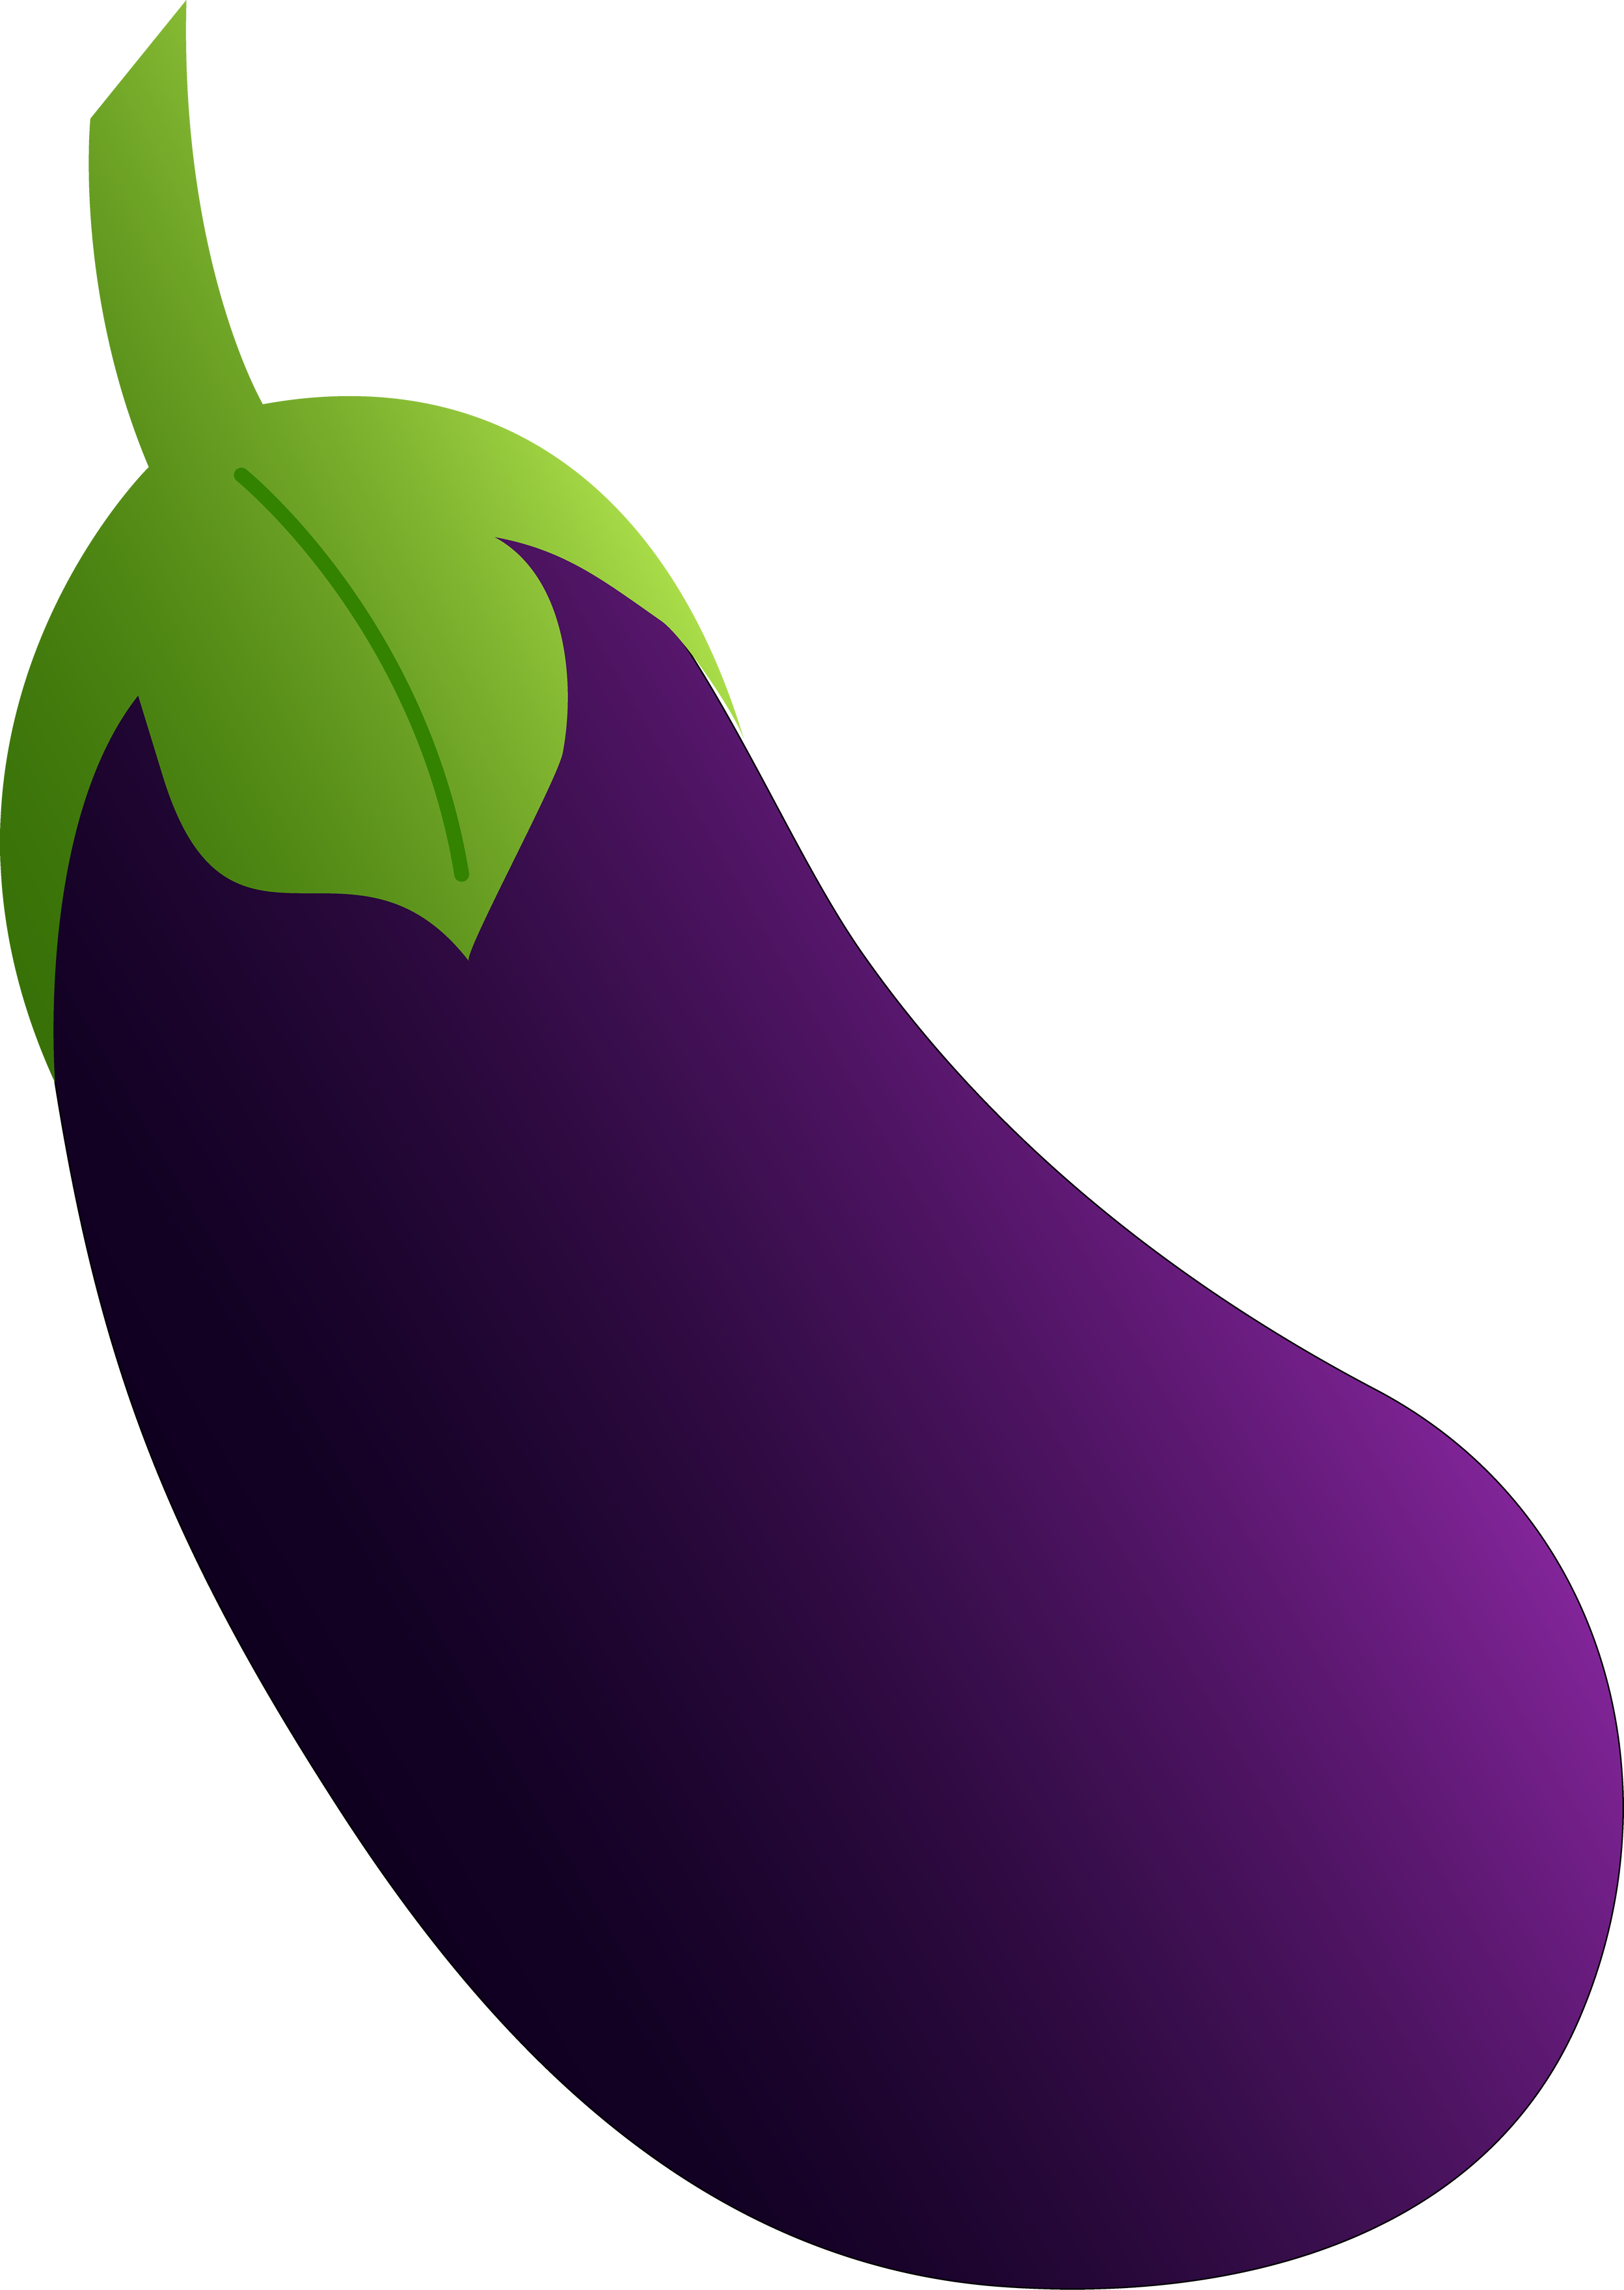 Eggplant PNG images free down